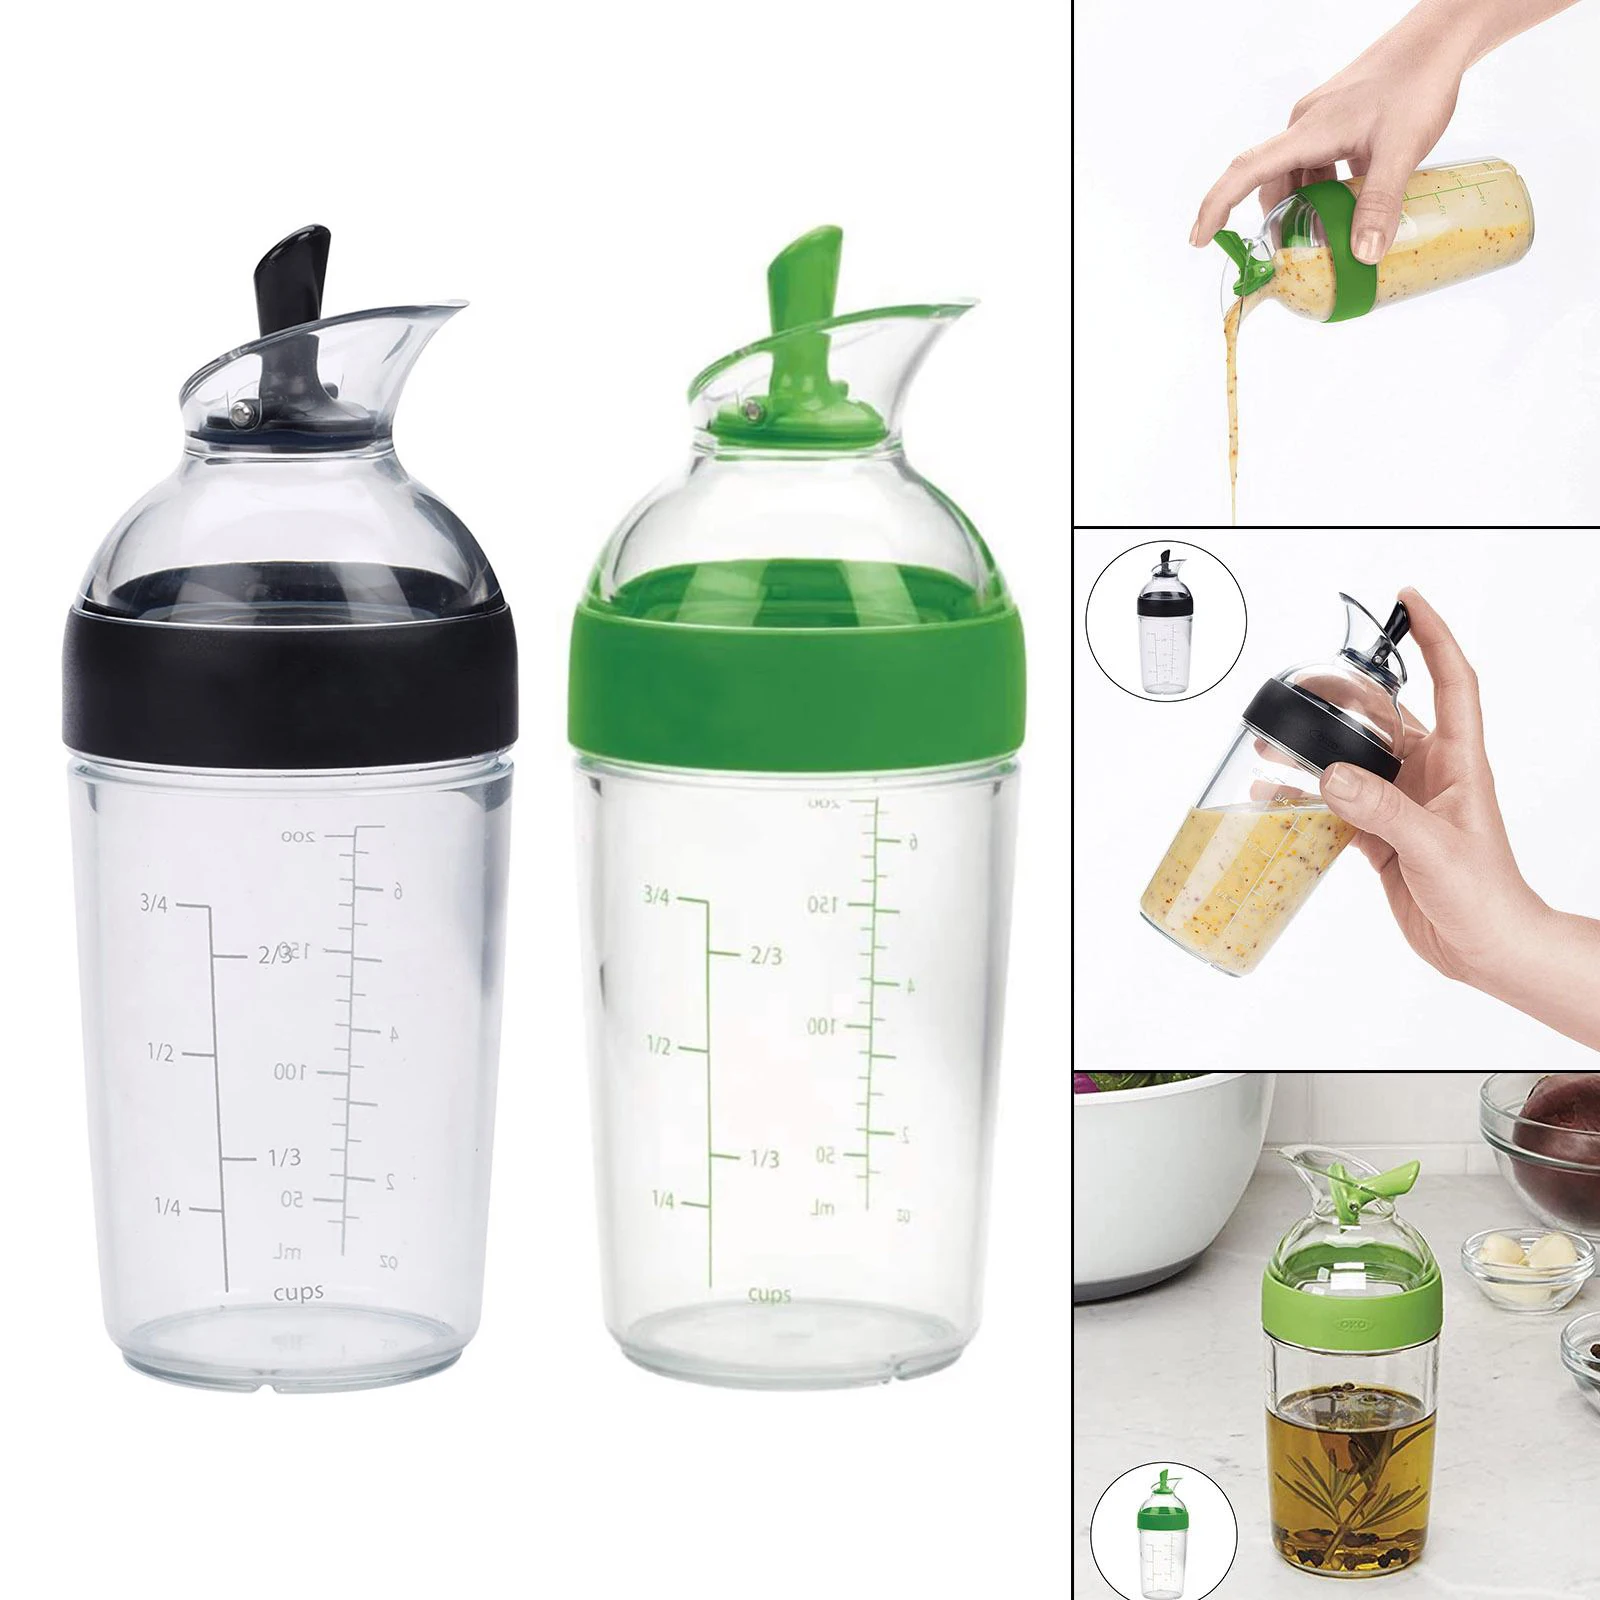 

1pc Small Salad Dressing Shaker Cup Container Emulsifier Universal Manual Sauces Mixer Spill Resistant